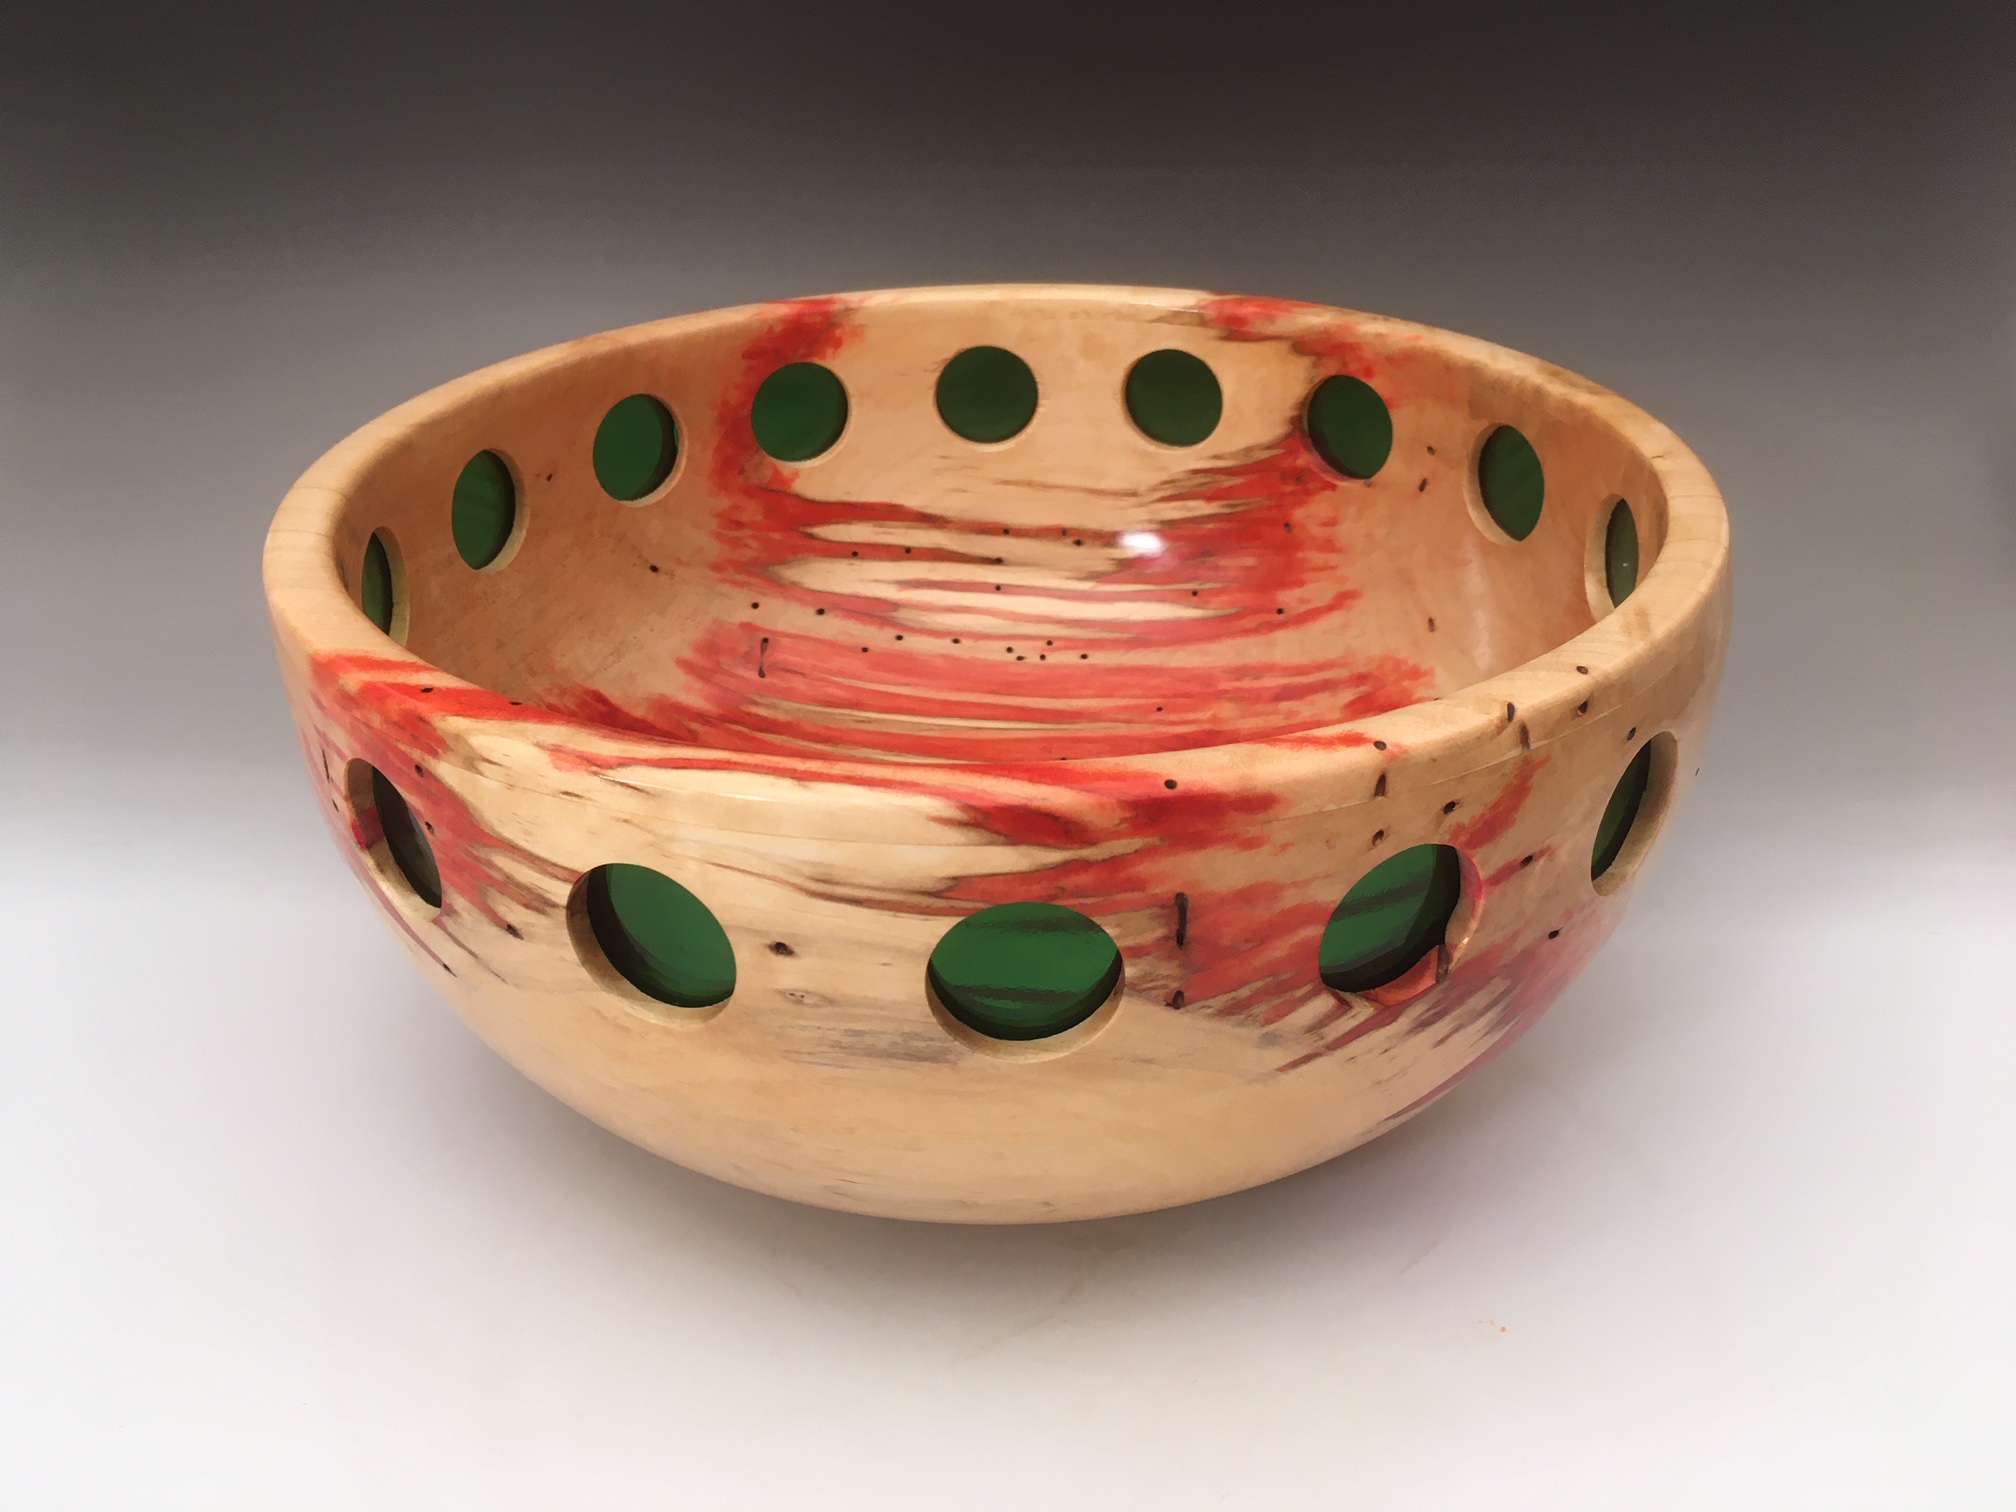 Woodturning Artistry